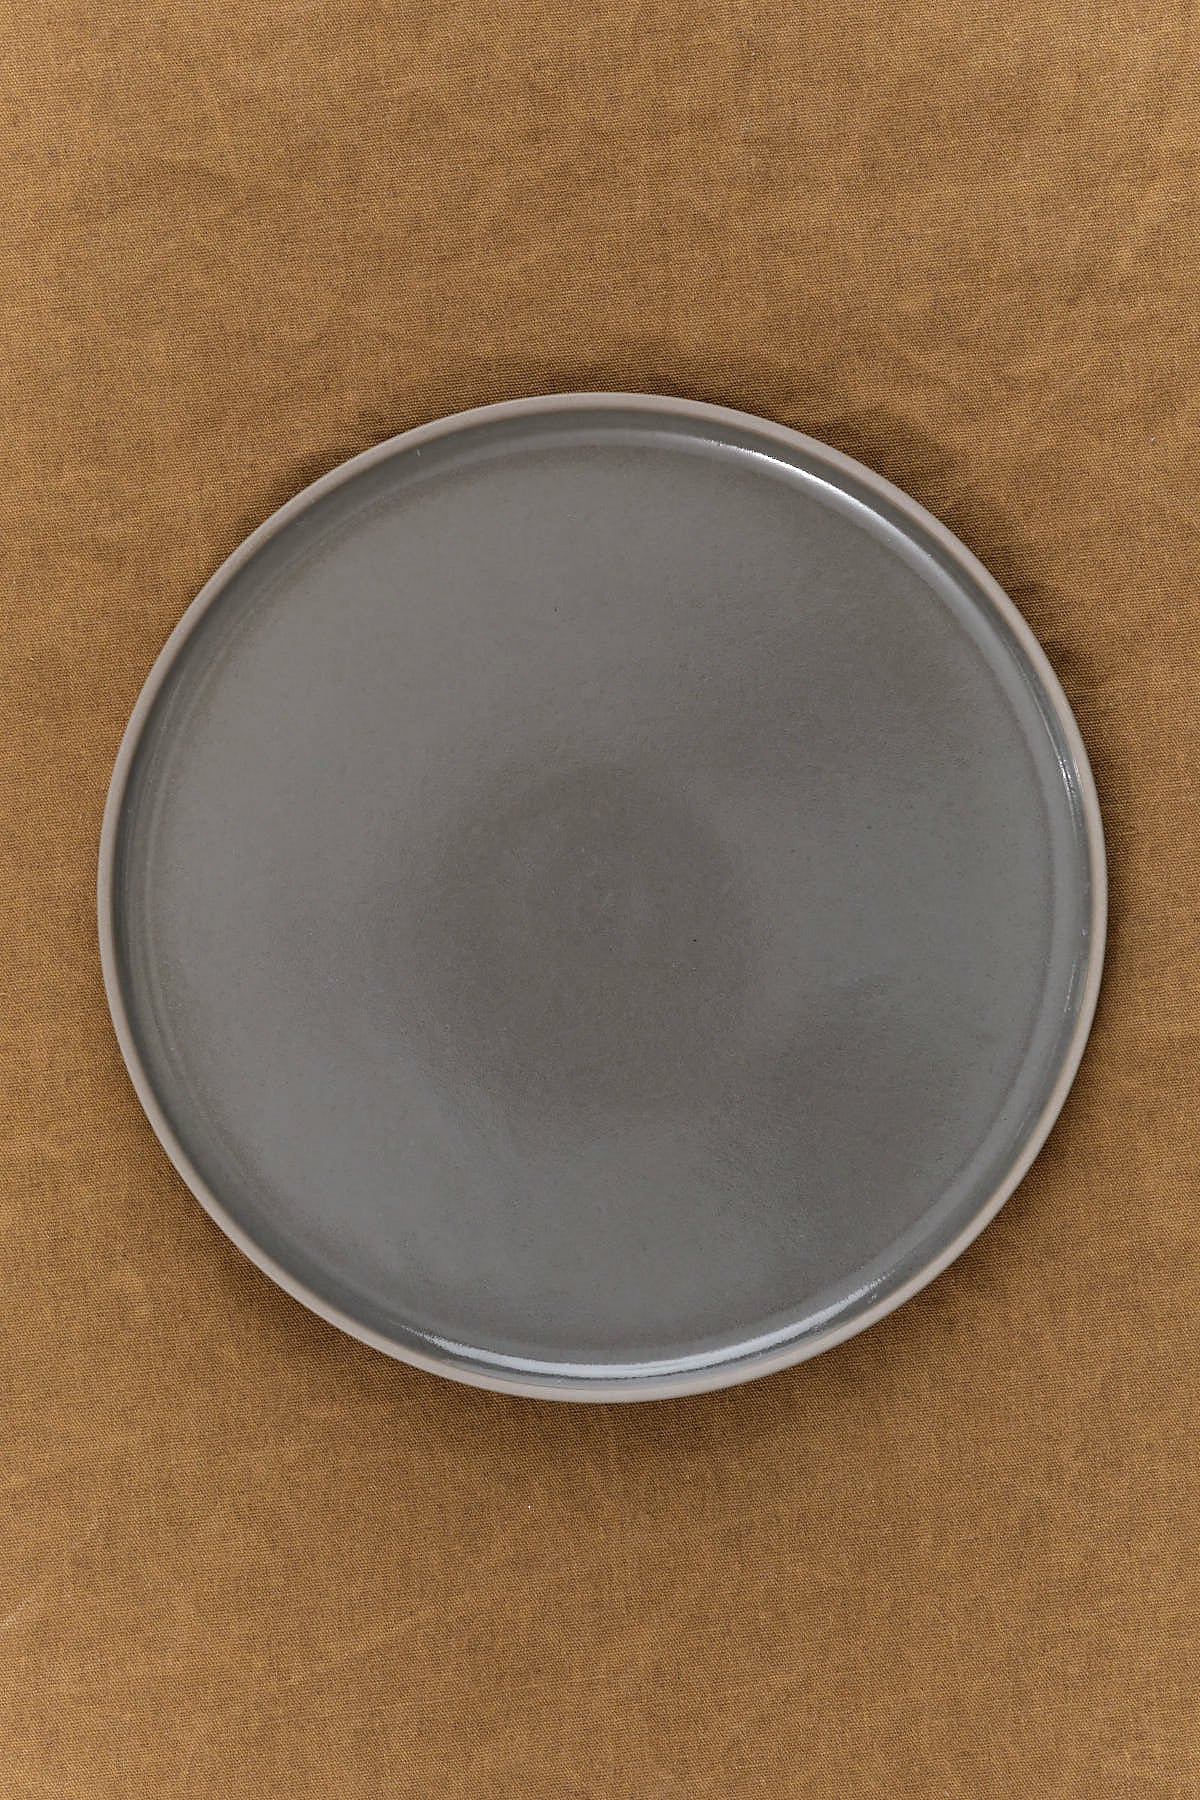 Top view of 10" Glazed Plate